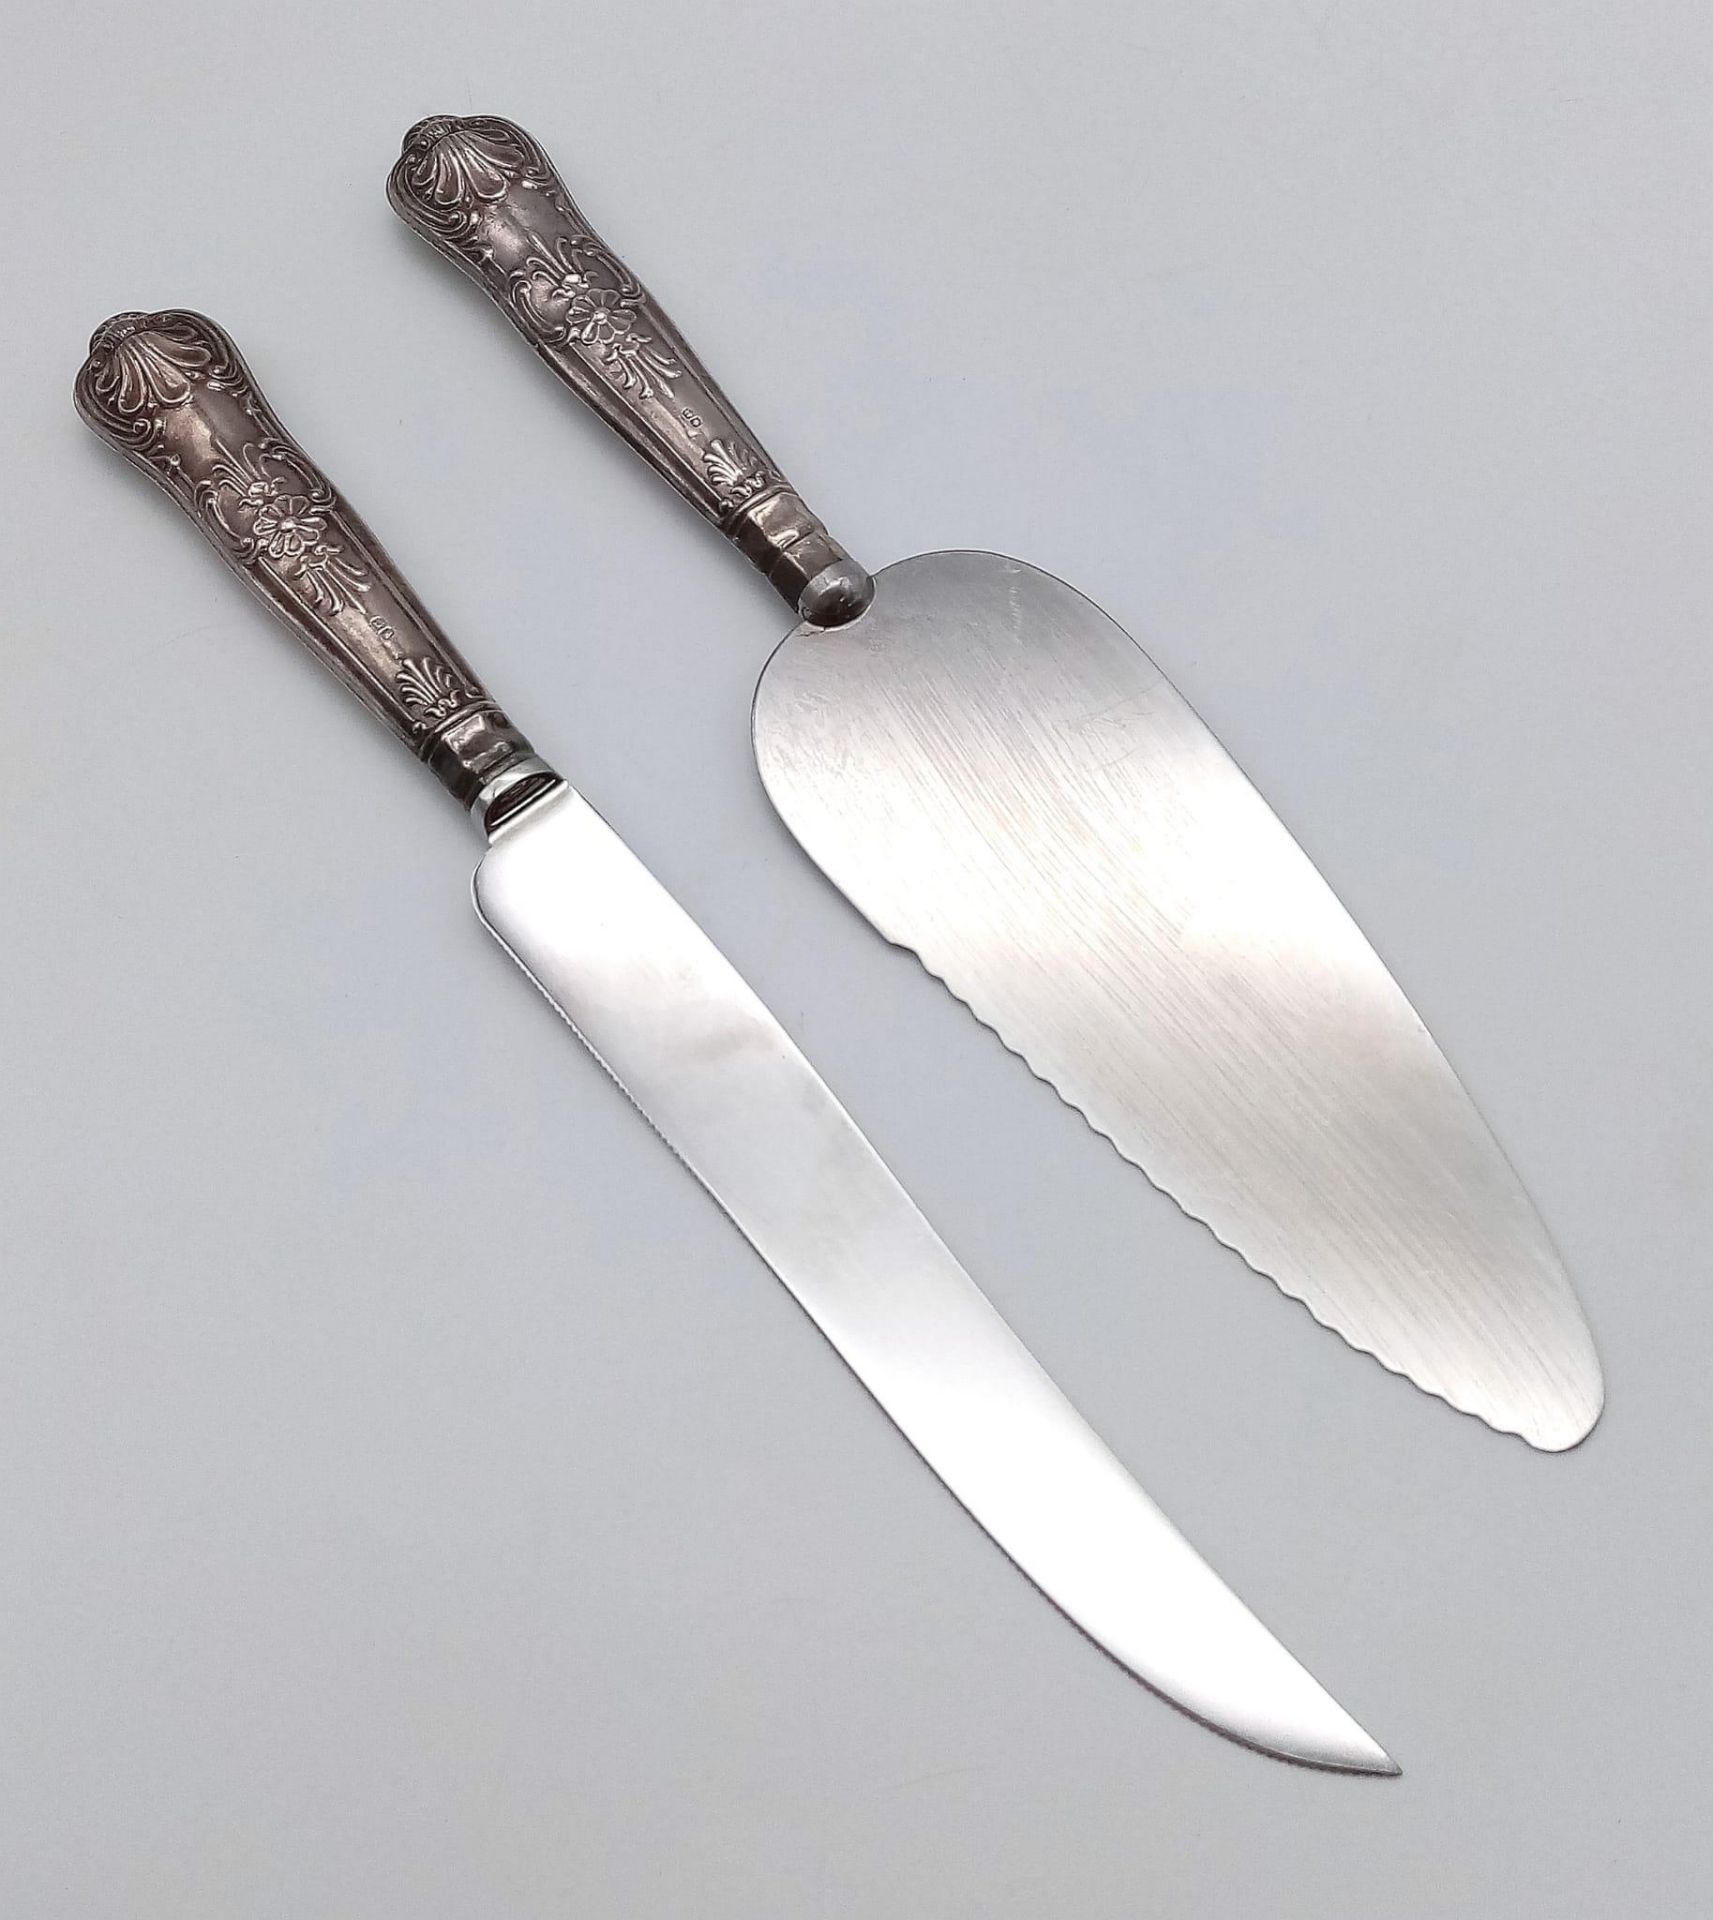 A Vintage Silver Handled Cake Server with Hallmarked Handle - Comes with an Additional Cake Knife,